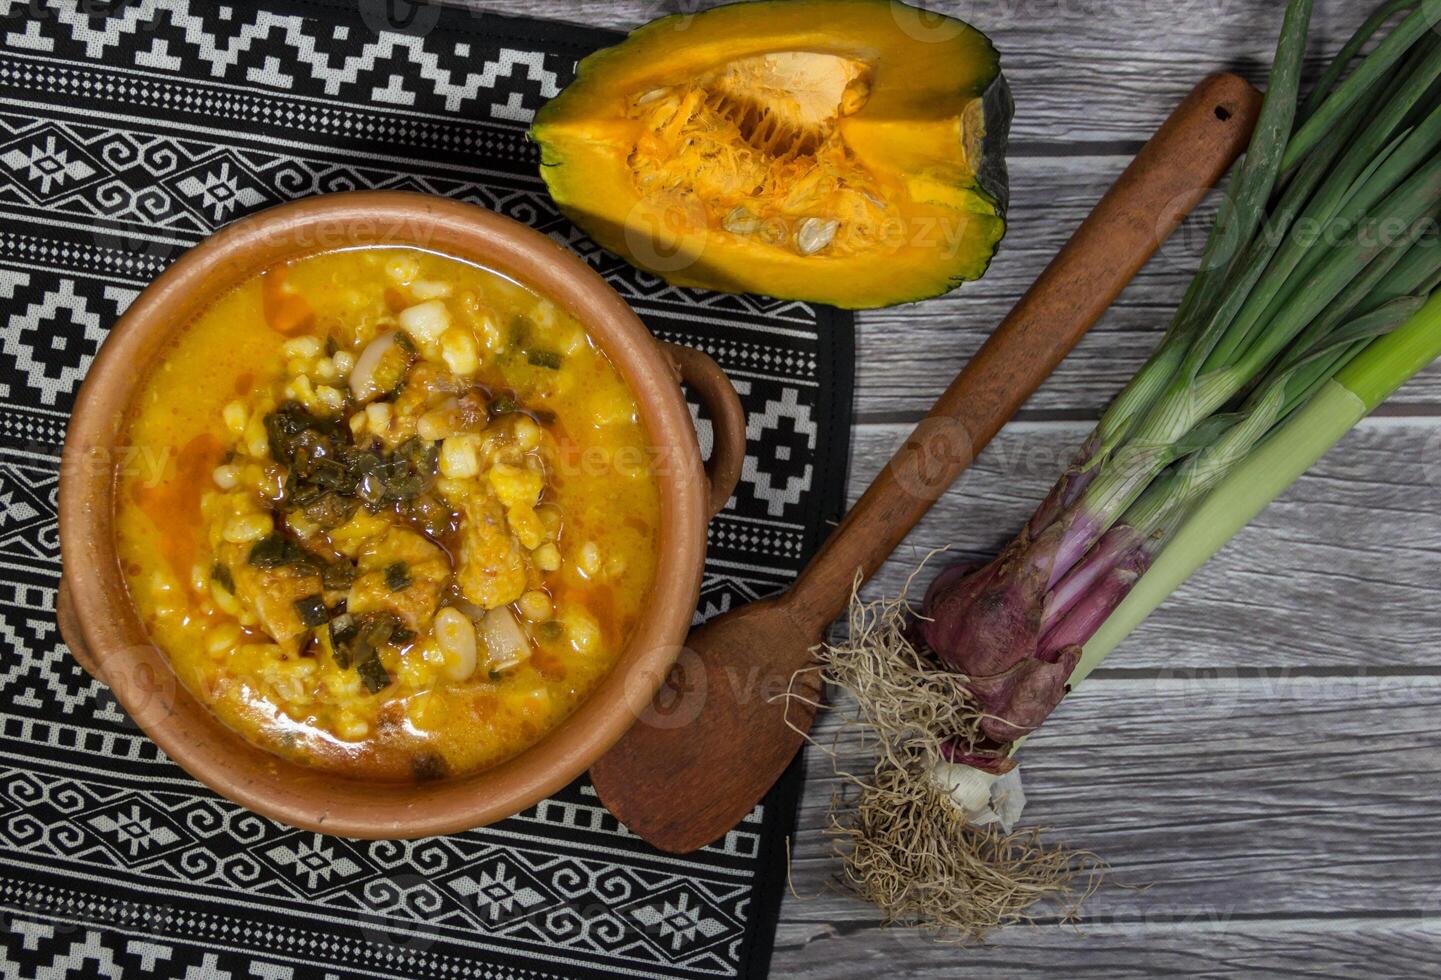 Northern locro dish and ingredients, typical to celebrate national days in Argentina. Traditional gastronomy photo